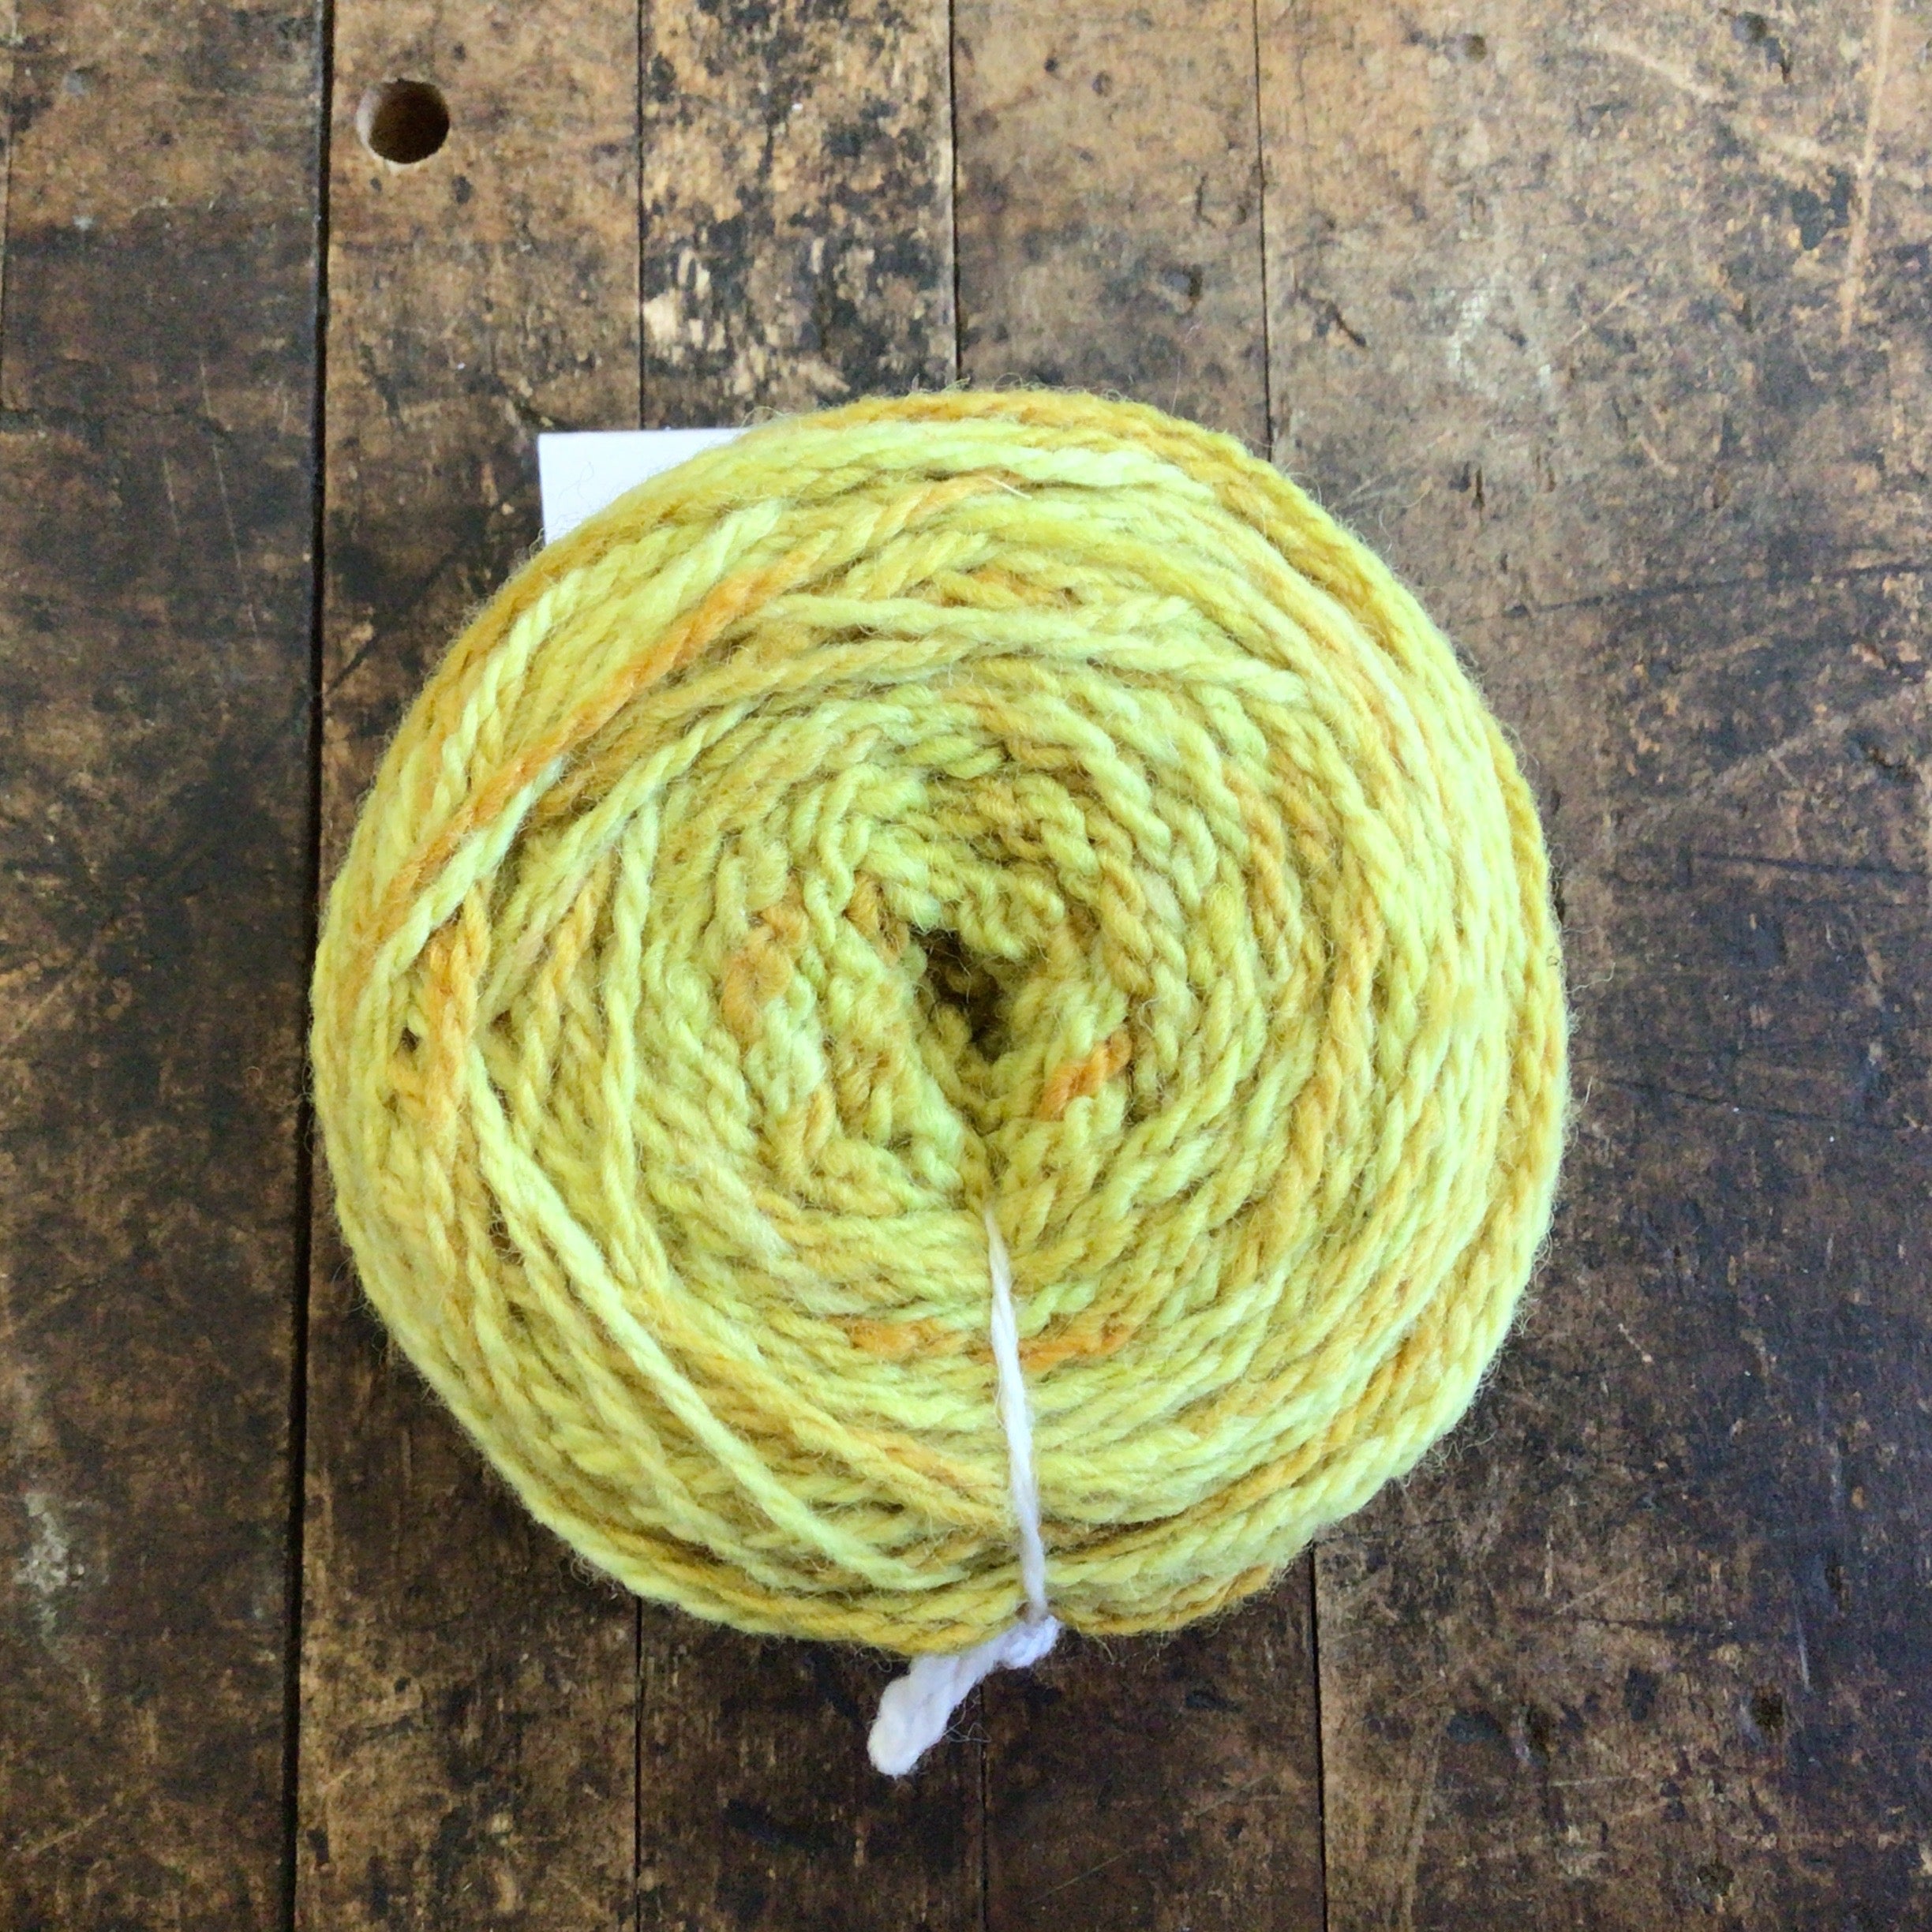 Tronstad Ranch Rambouillet 2 Ply Worsted Weight Yarn - Cowboy Gold